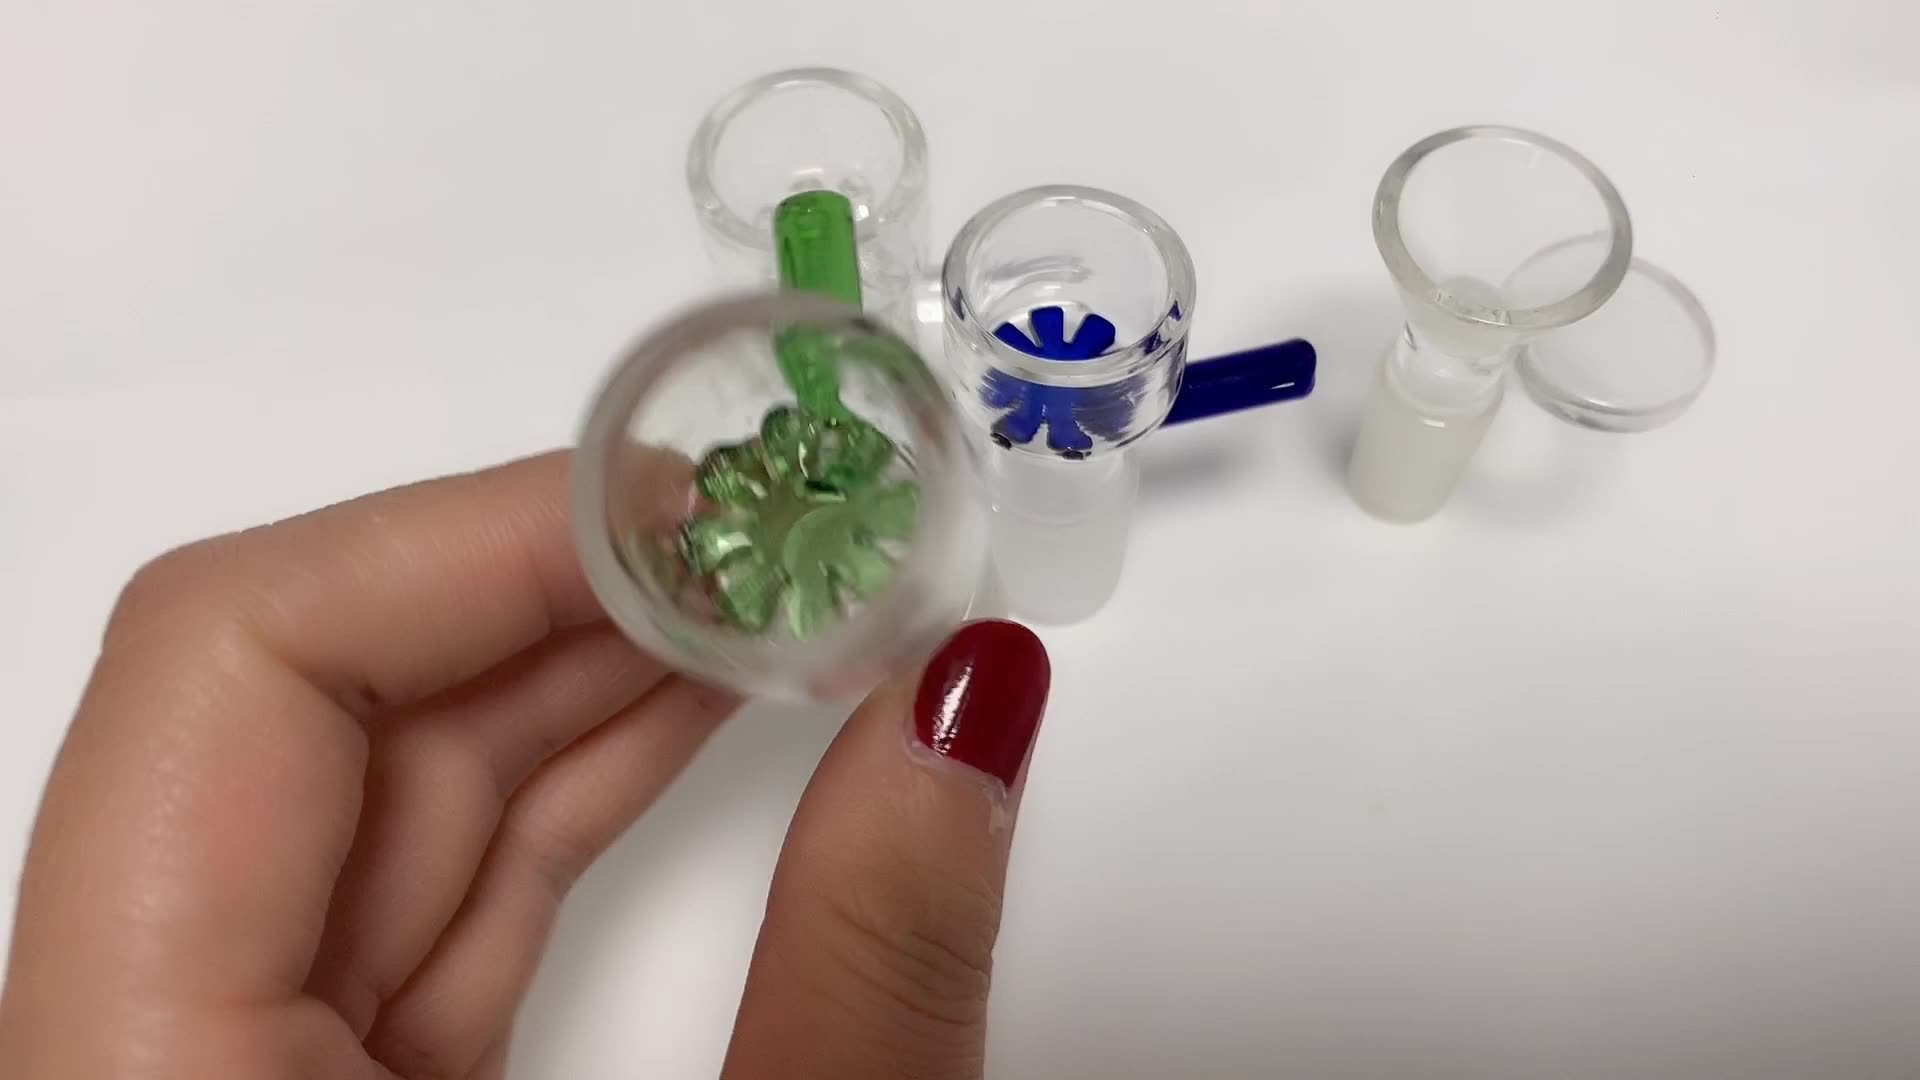 14mm 18mm Bowl Glass Bowl Piece Snowflake Filter Heady Bowl With Screen  Round Smoking Bowls For Bong Dab Rig From Bongsshop, $3.94